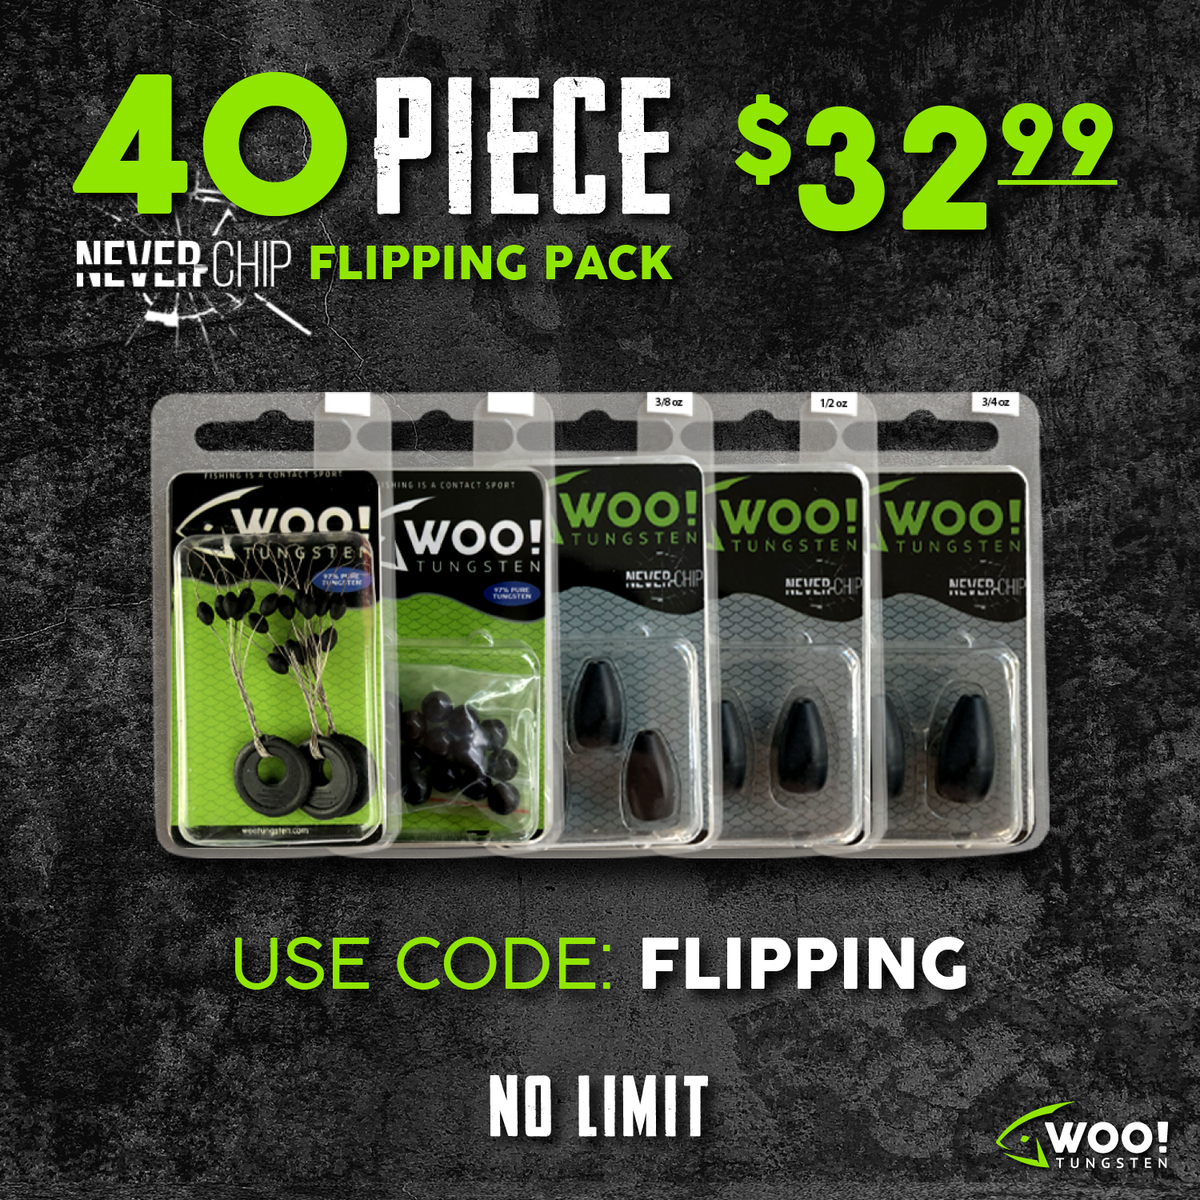 FLIPPING PACK - 40 Piece - Between 3/8 oz and 3/4 oz - USE CODE FLIPP –  WOO! TUNGSTEN